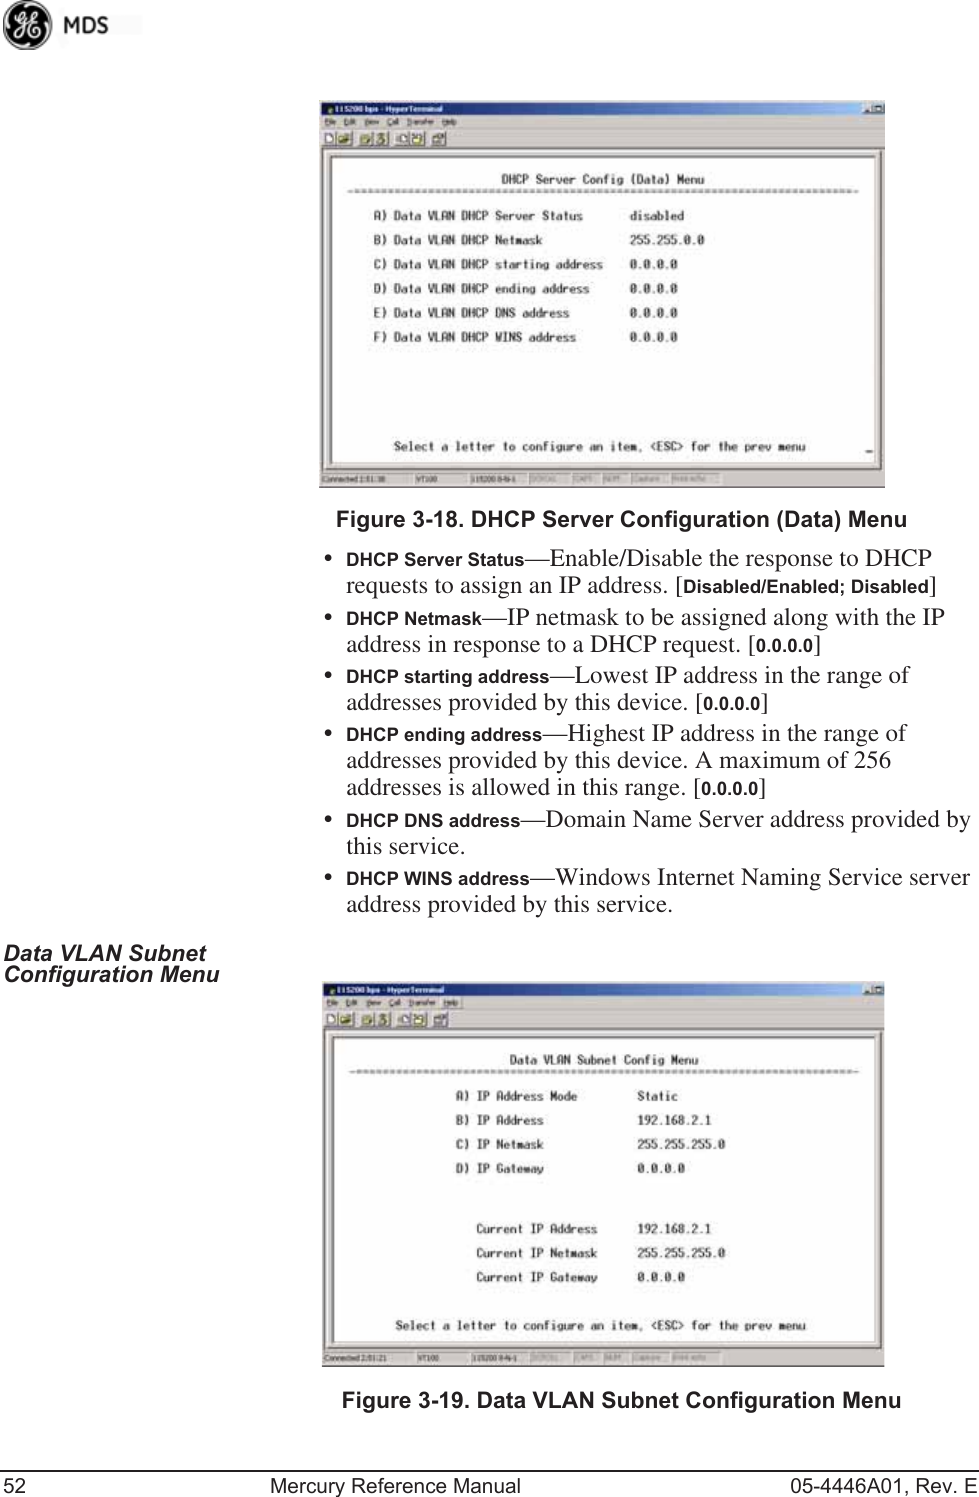 52 Mercury Reference Manual 05-4446A01, Rev. EInvisible place holderFigure 3-18. DHCP Server Configuration (Data) Menu•DHCP Server Status—Enable/Disable the response to DHCP requests to assign an IP address. [Disabled/Enabled; Disabled]•DHCP Netmask—IP netmask to be assigned along with the IP address in response to a DHCP request. [0.0.0.0]•DHCP starting address—Lowest IP address in the range of addresses provided by this device. [0.0.0.0]•DHCP ending address—Highest IP address in the range of addresses provided by this device. A maximum of 256 addresses is allowed in this range. [0.0.0.0]•DHCP DNS address—Domain Name Server address provided by this service.•DHCP WINS address—Windows Internet Naming Service server address provided by this service.Data VLAN Subnet Configuration Menu Invisible place holderFigure 3-19. Data VLAN Subnet Configuration Menu 